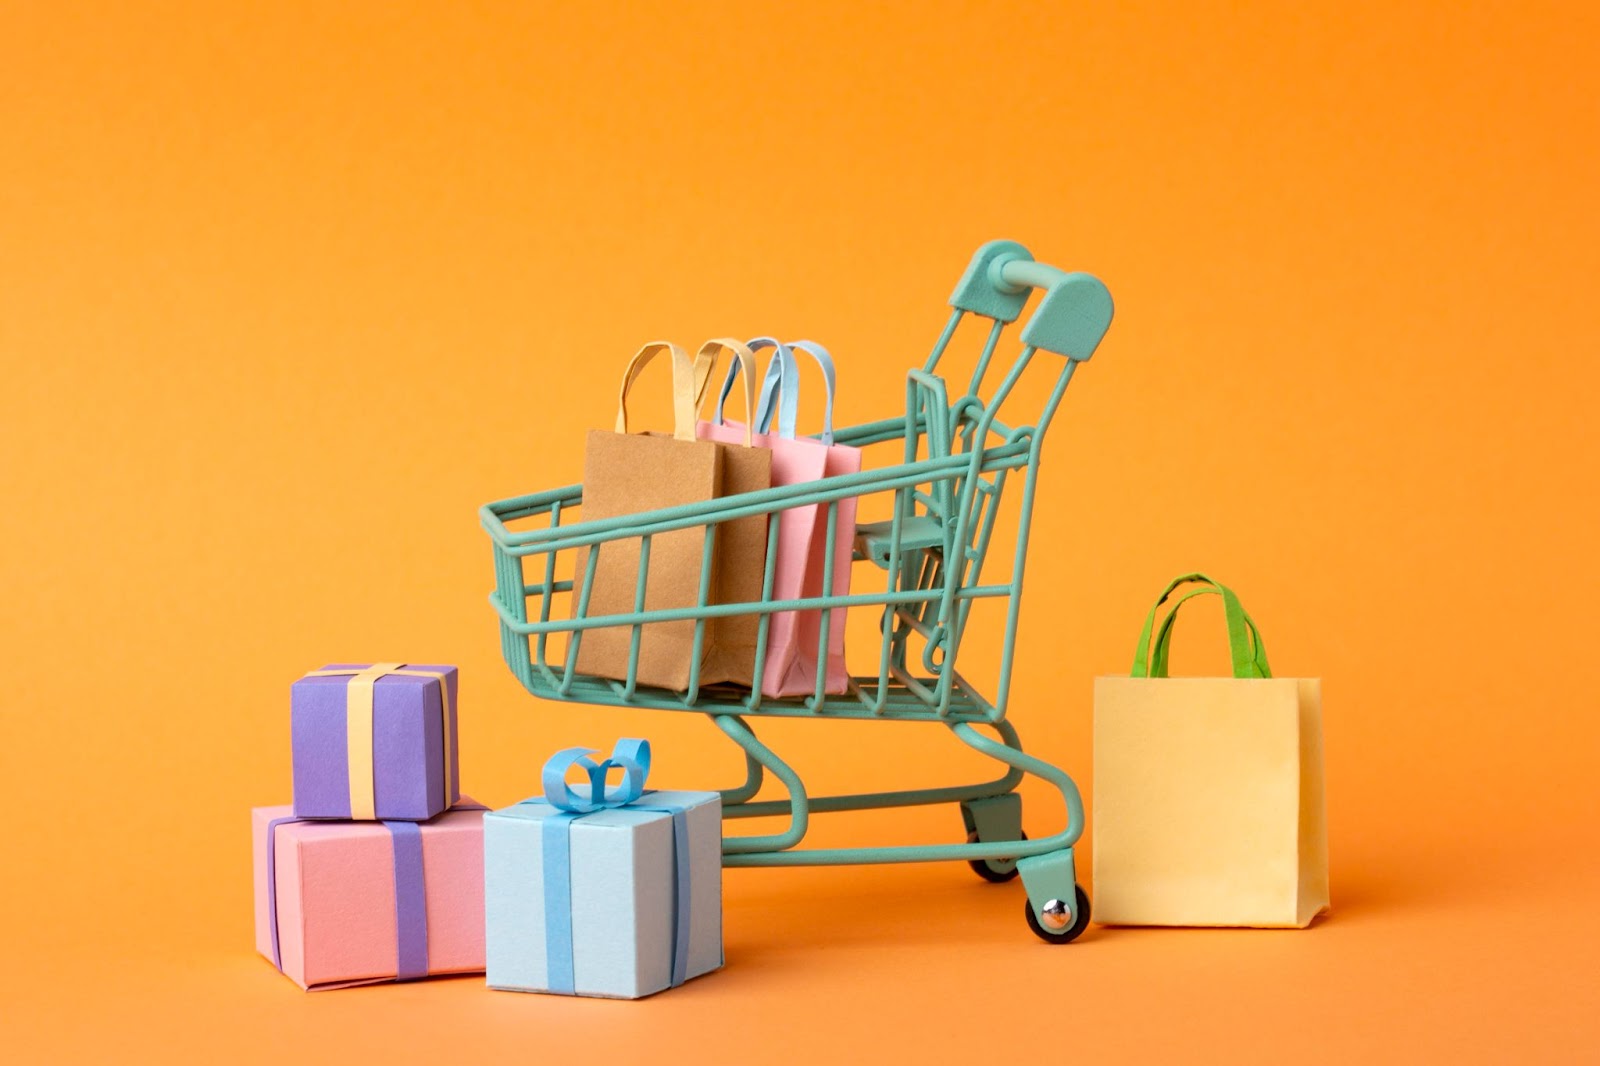 Cyber Monday, Black Friday, and Strategies for Every Shopper